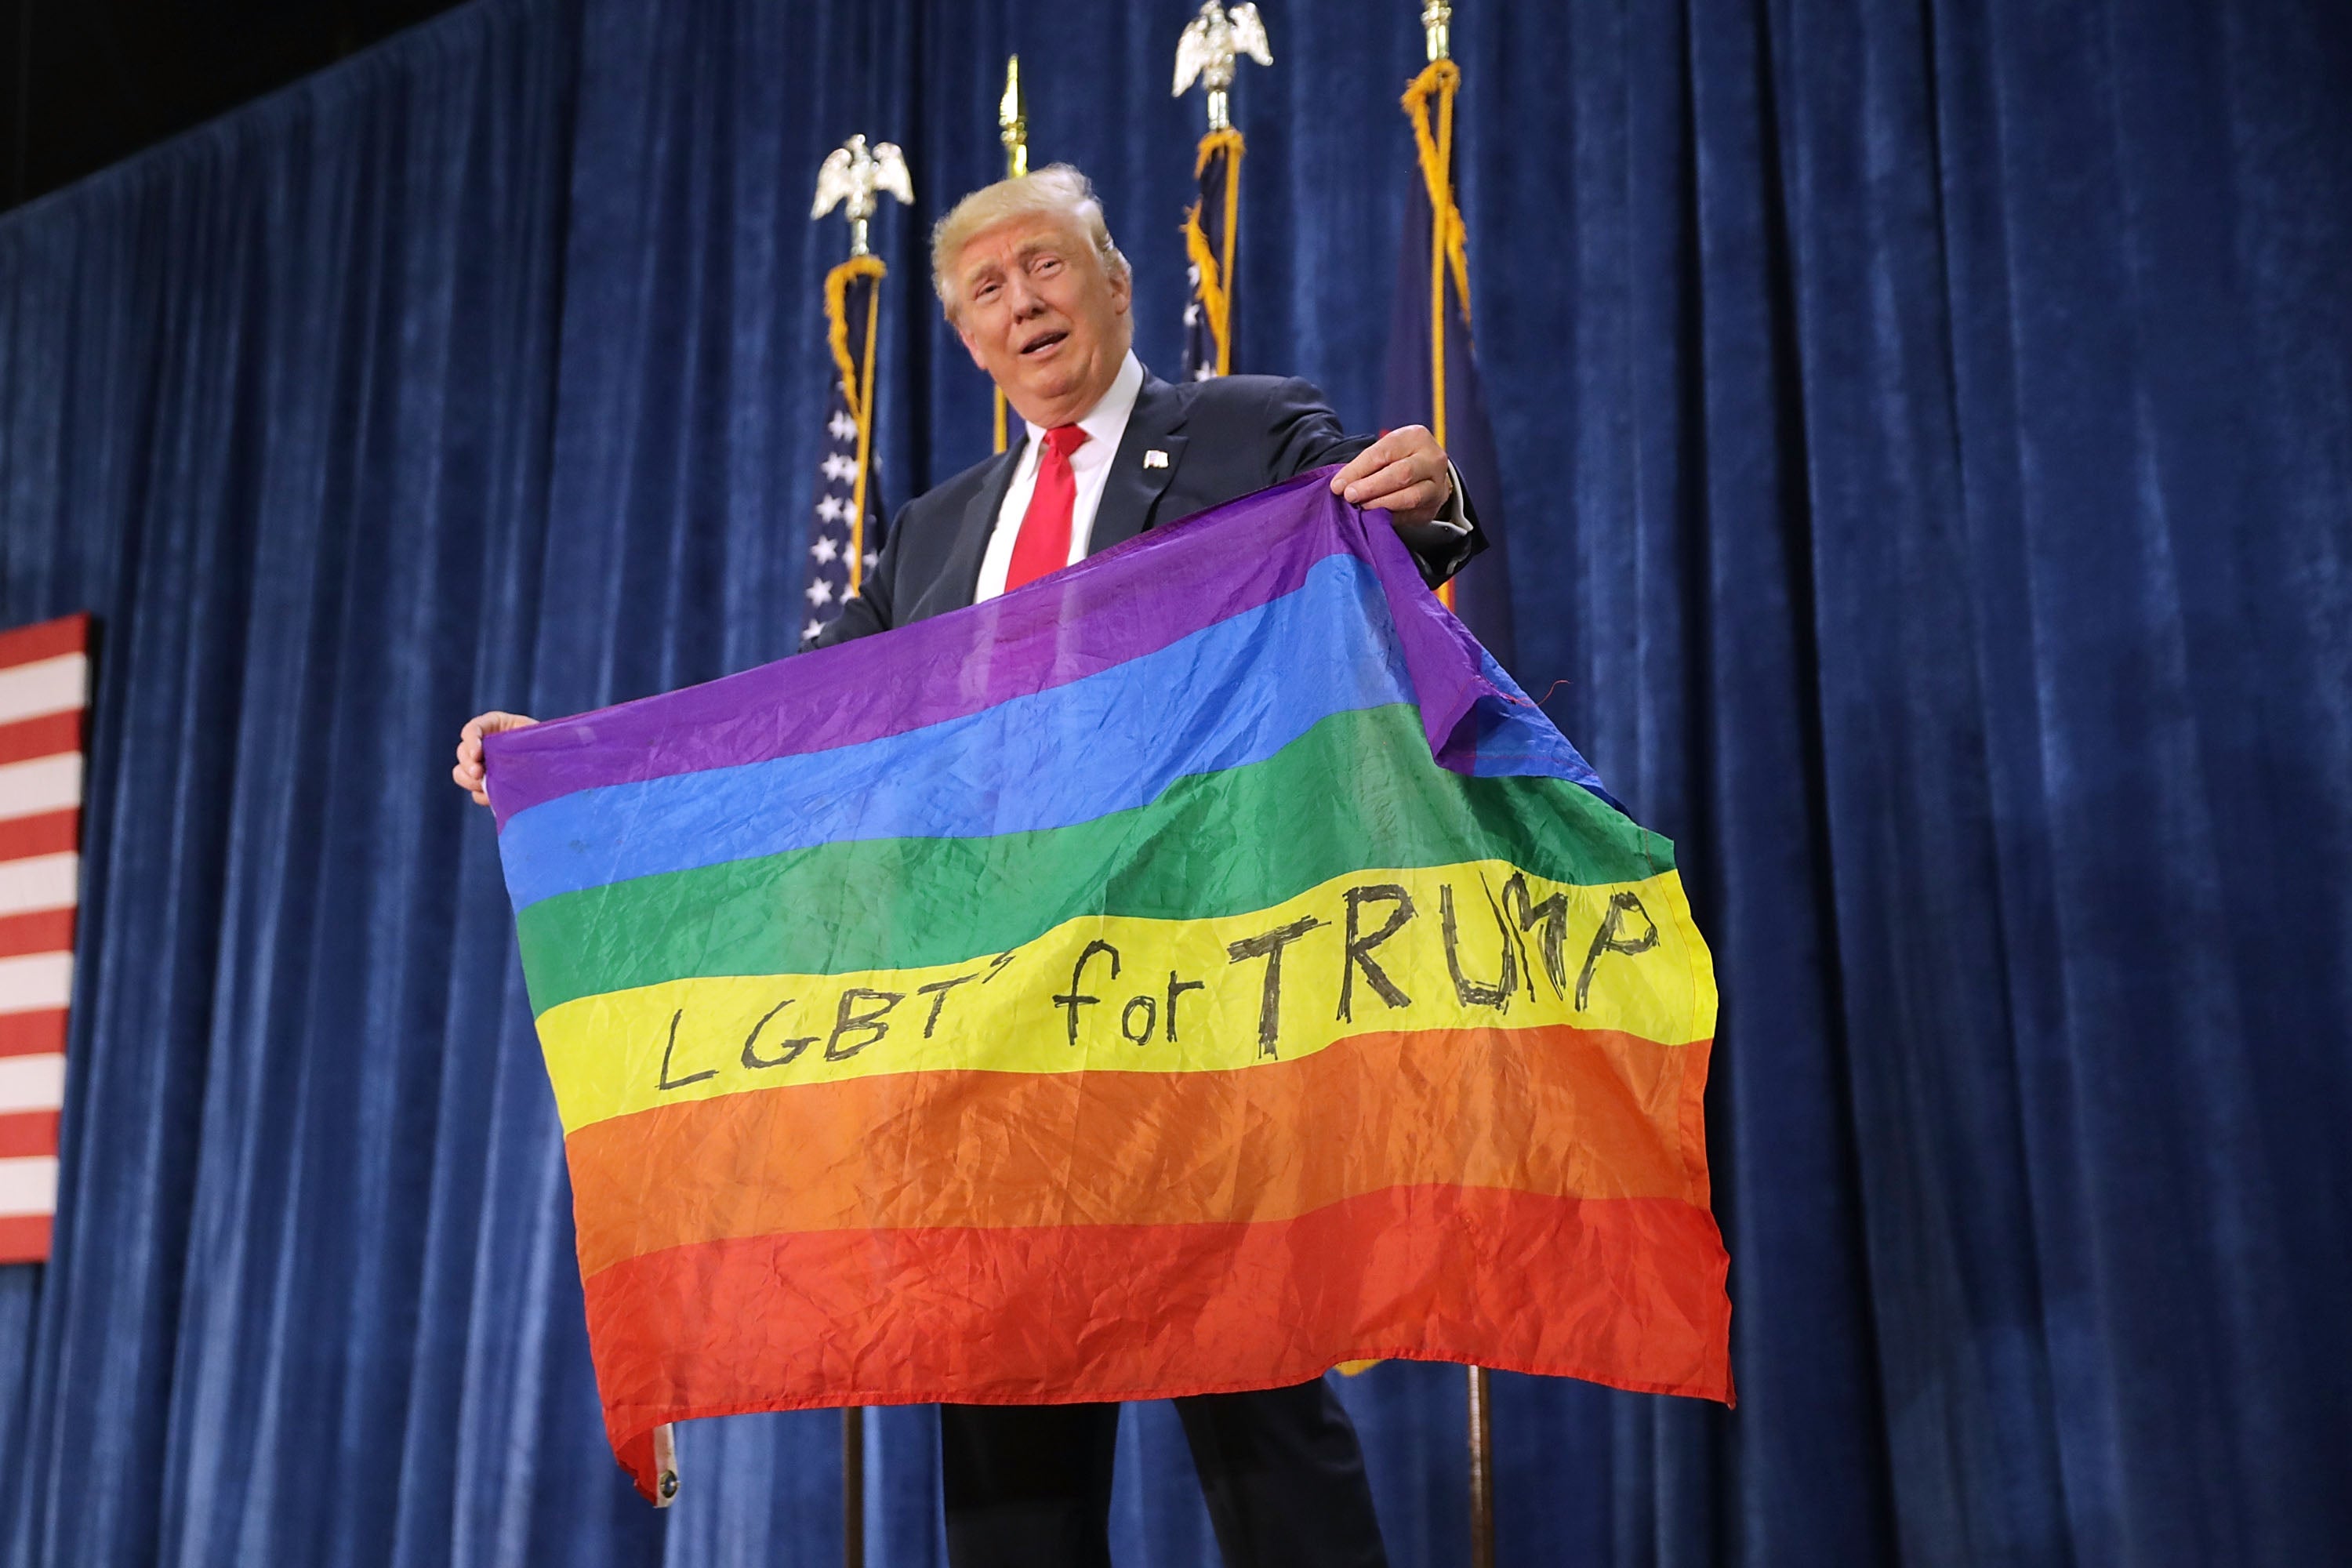 President Donald Trump rolled back a multitude of protections for transgender Americans and others over the last four years while attempting to court LGBTQ voters.